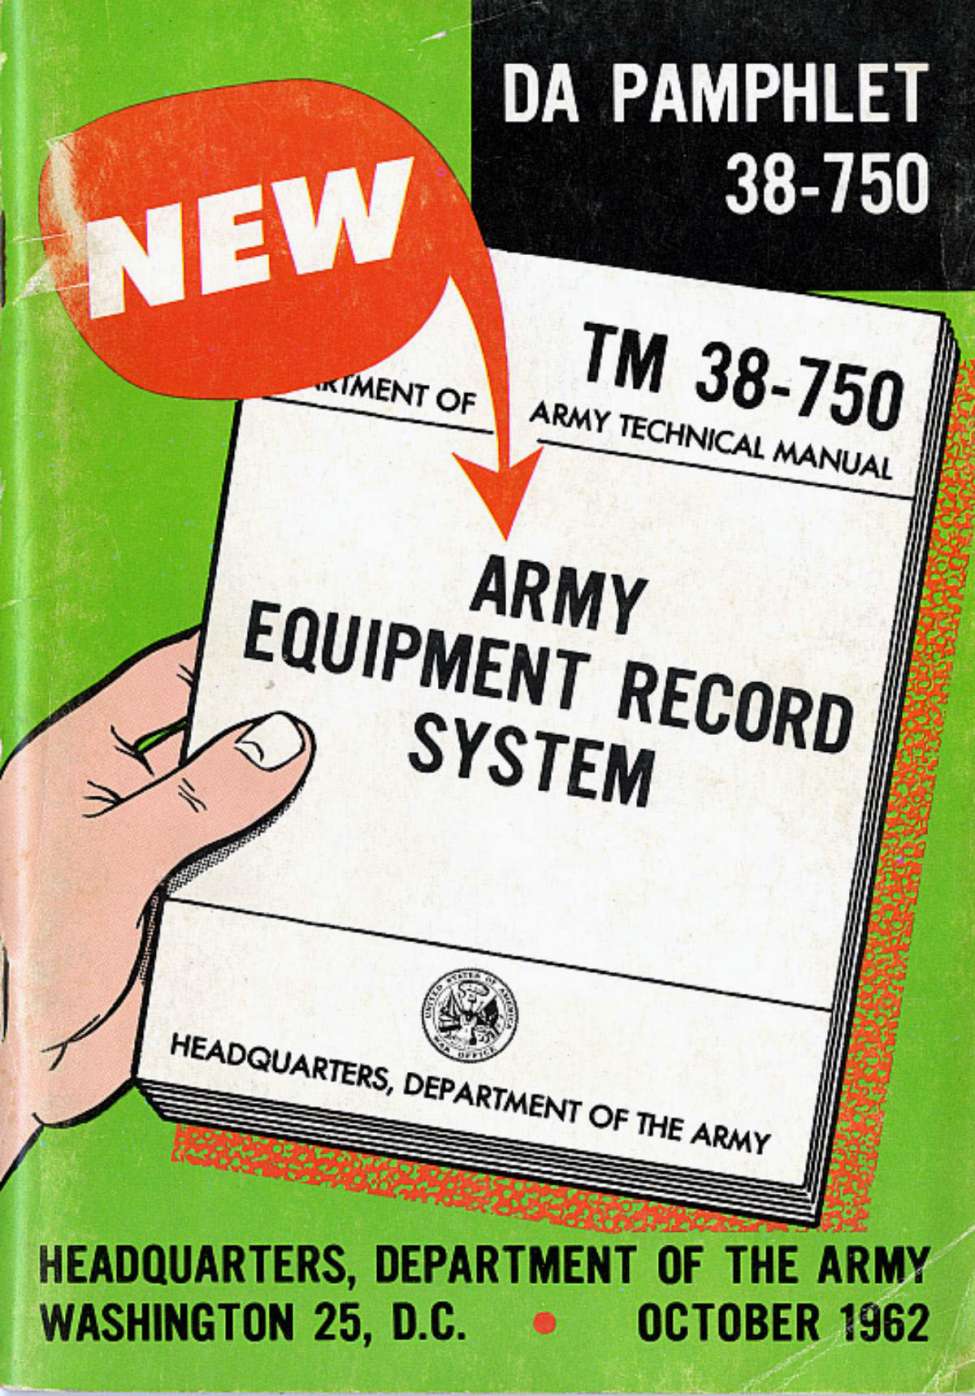 Book Cover For DA Pamphlet 38-750 Army Equipment Record System